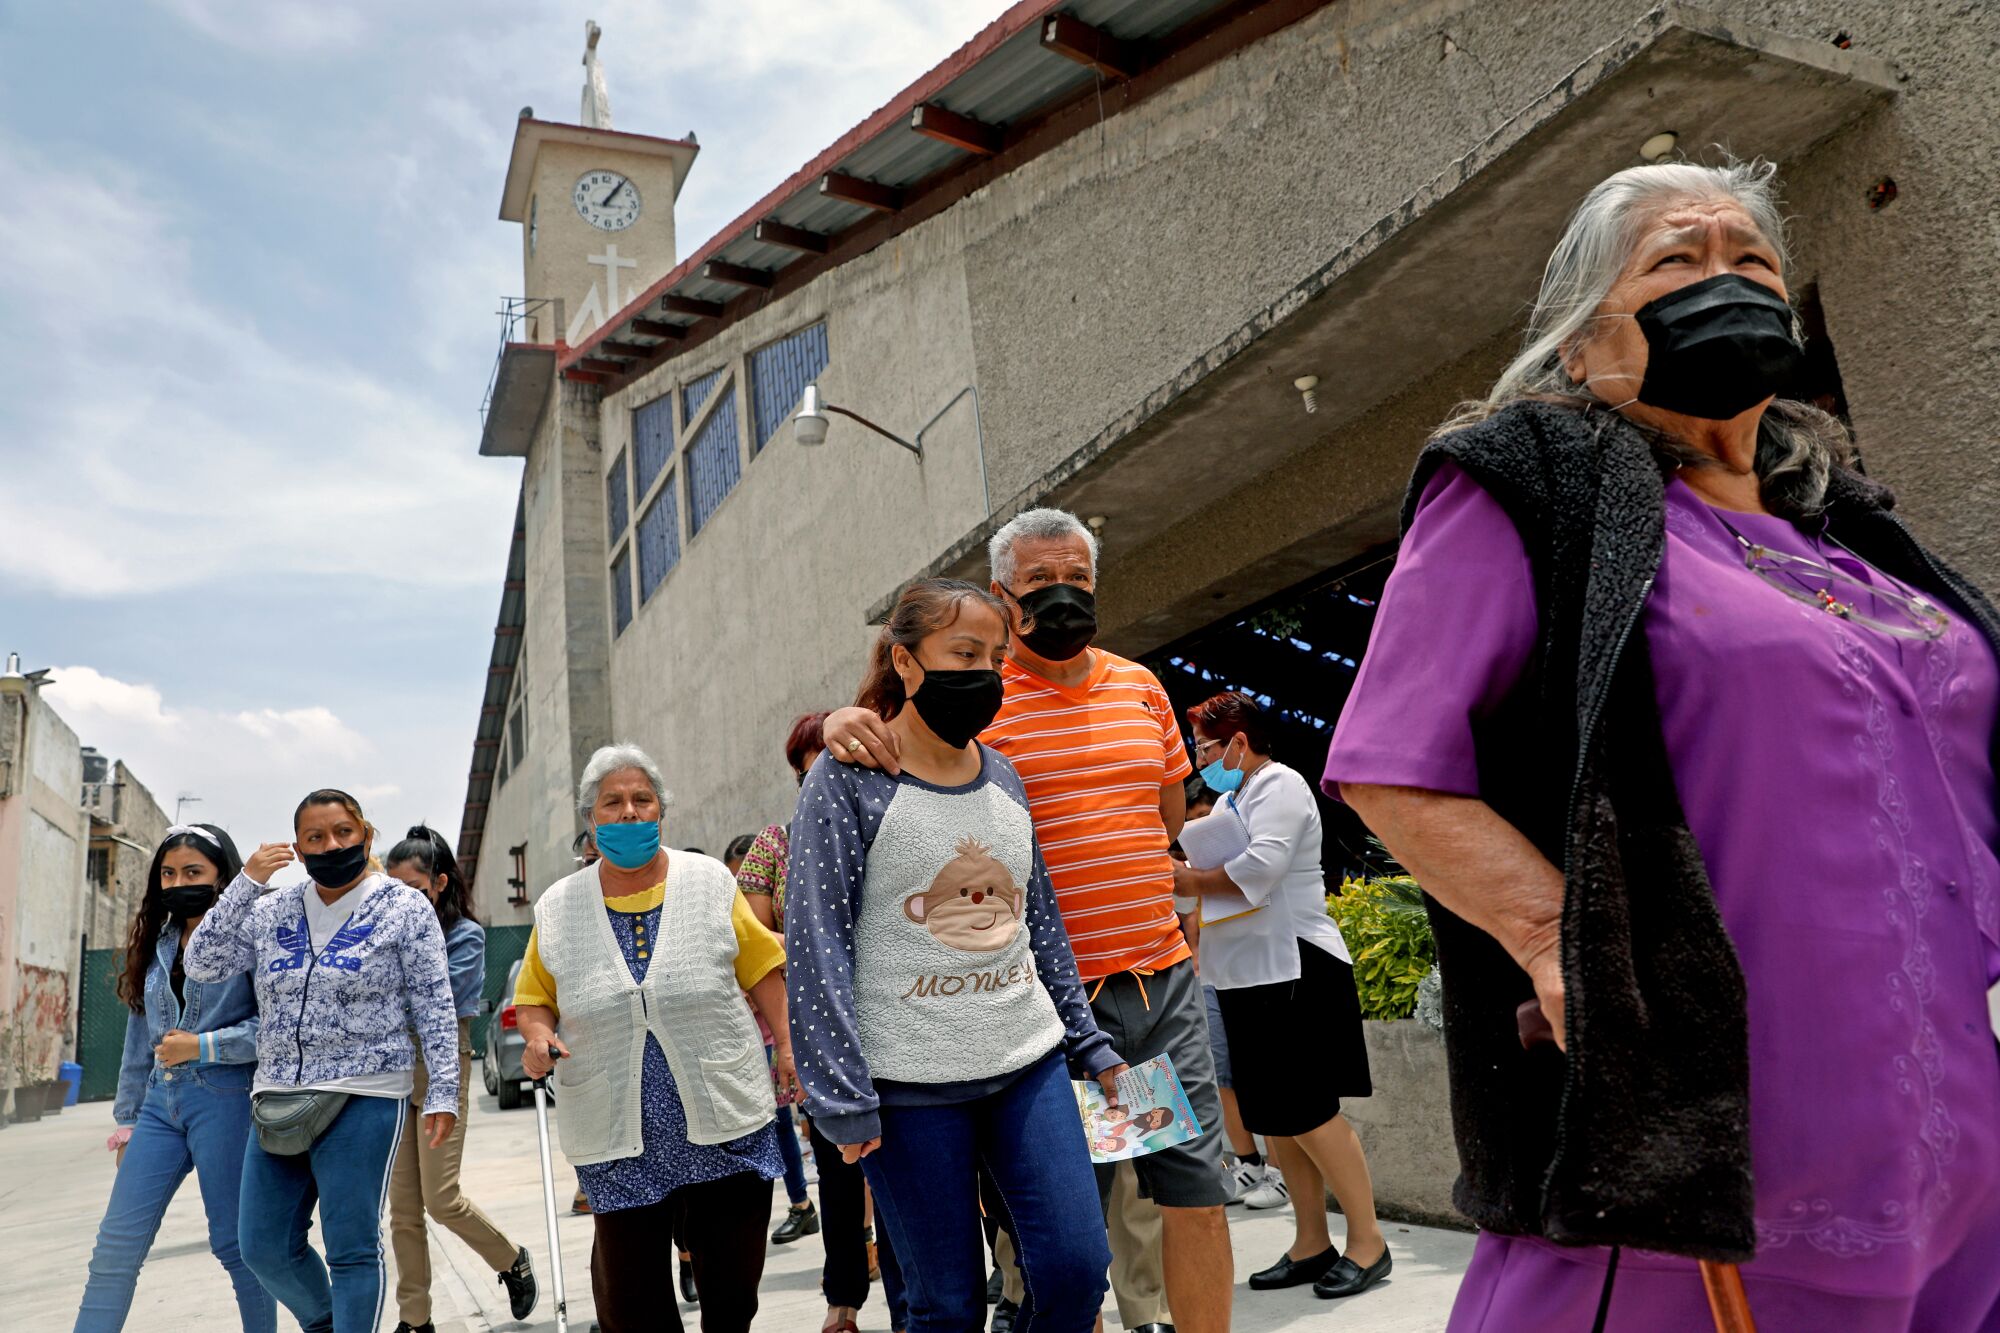 A group of people in masks walk out of a church building